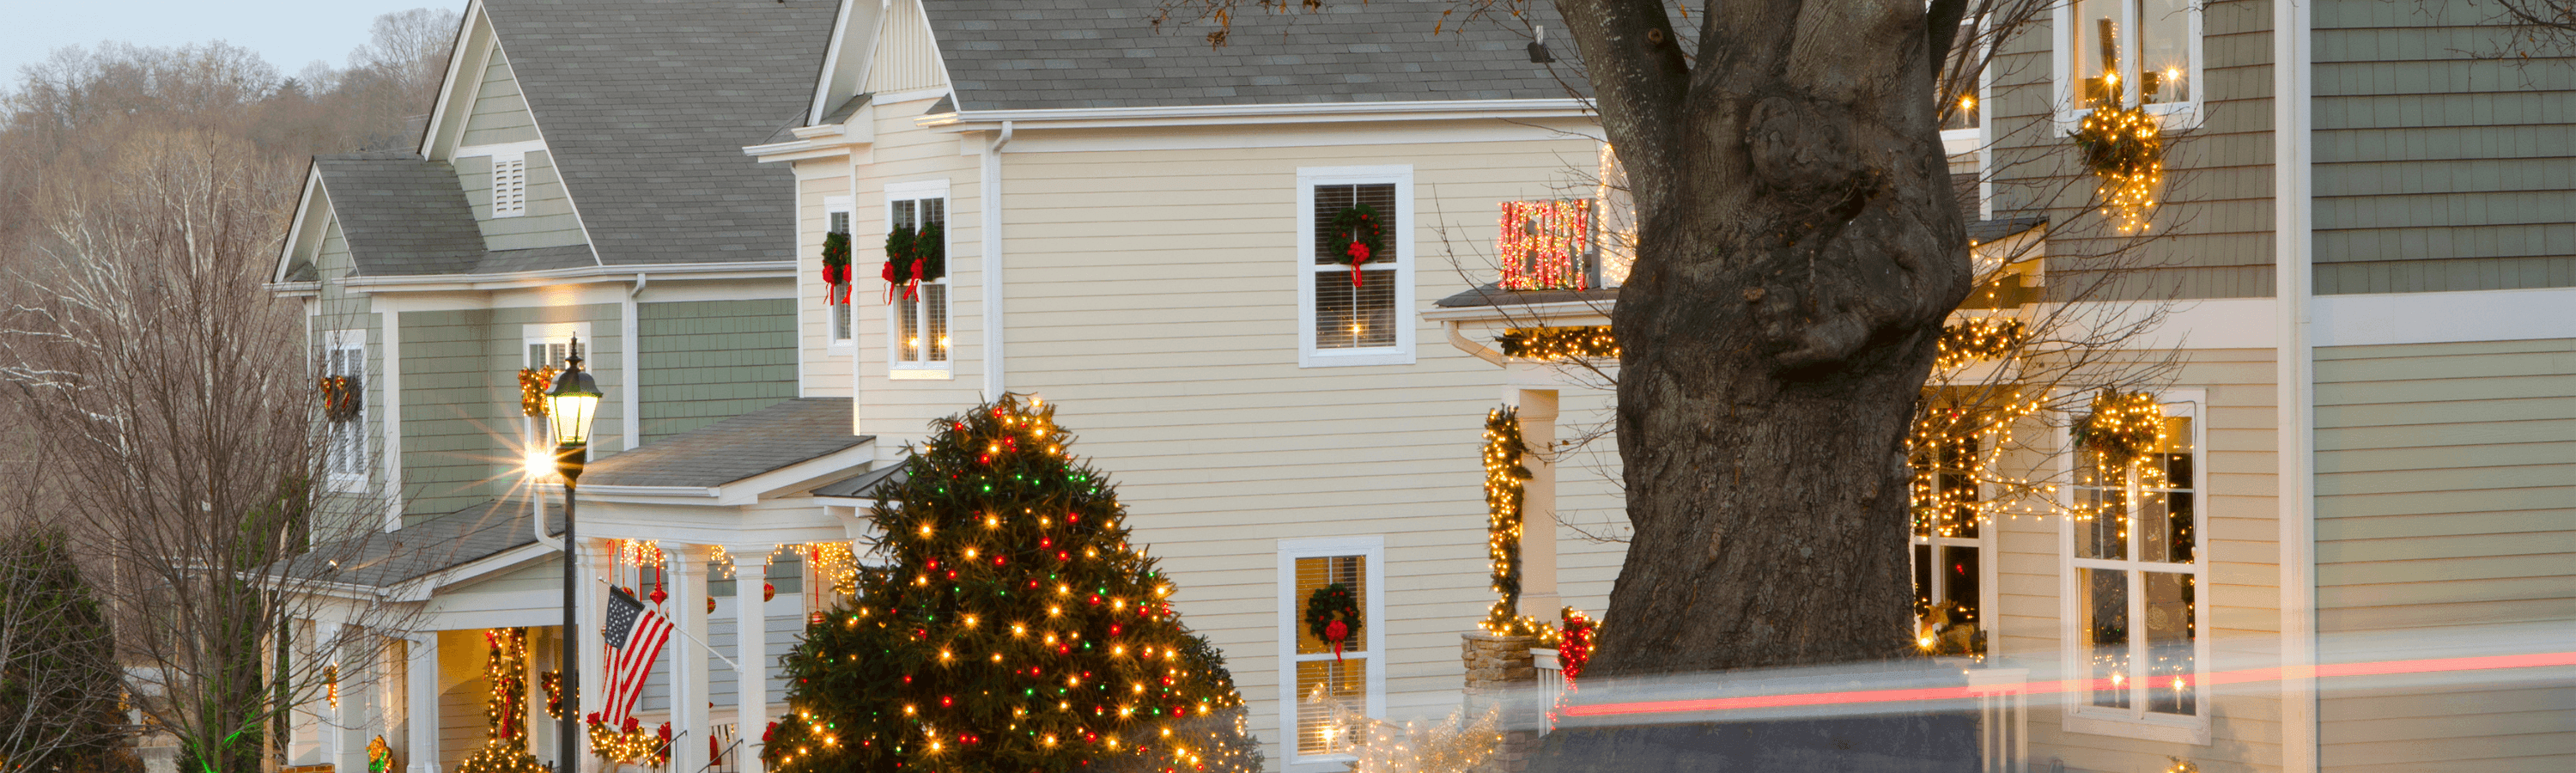 Holiday Home Safety: Comprehensive Guide for a Festive Season